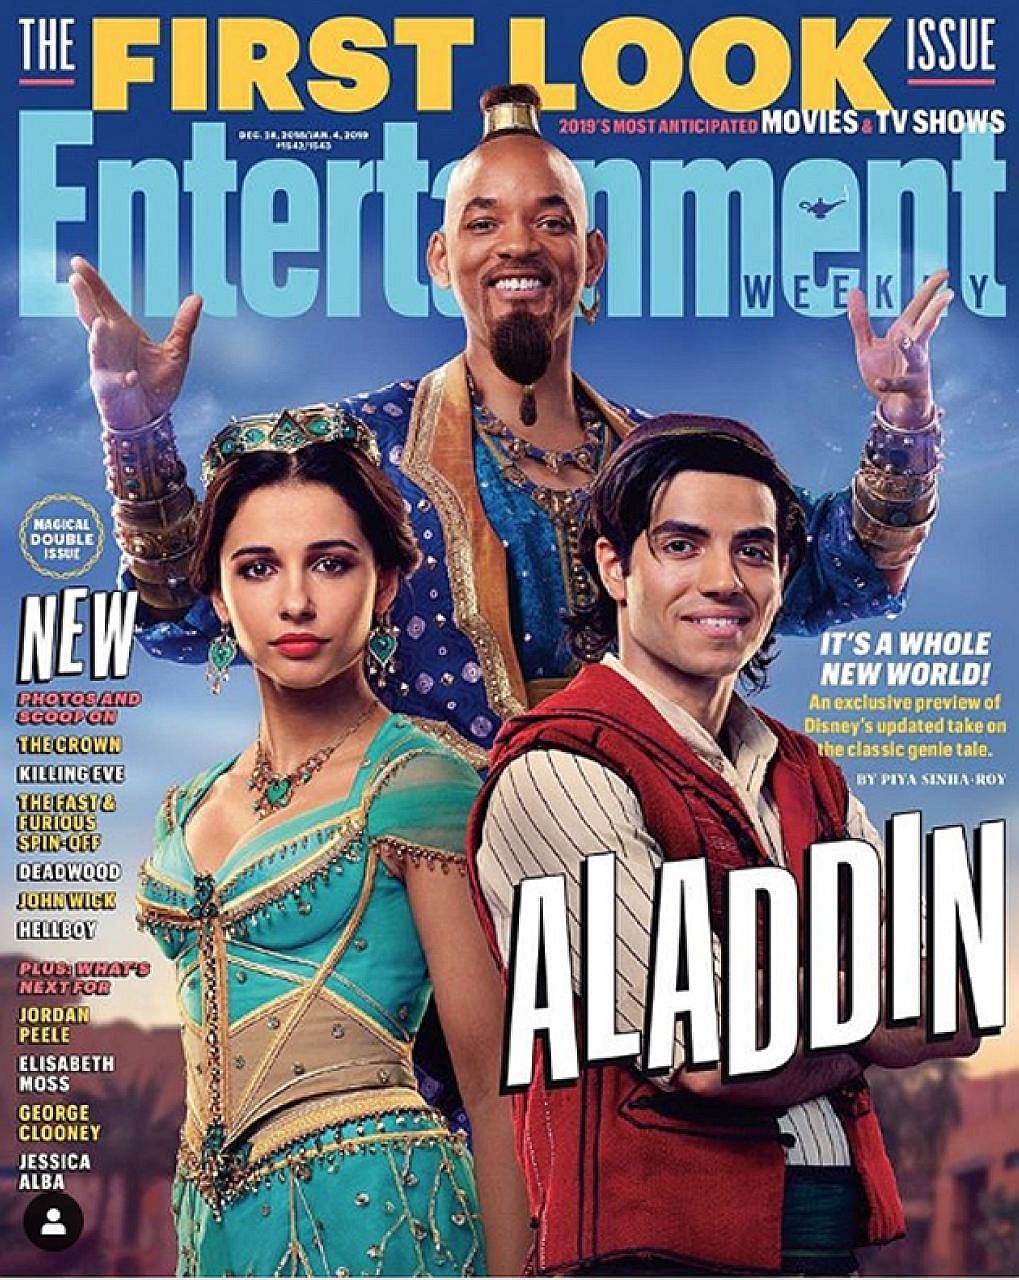 The Entertainment Weekly cover features American actor Will Smith as the Genie, British actress Naomi Scott as Princess Jasmine and Canadian actor Mena Massoud as Aladdin.